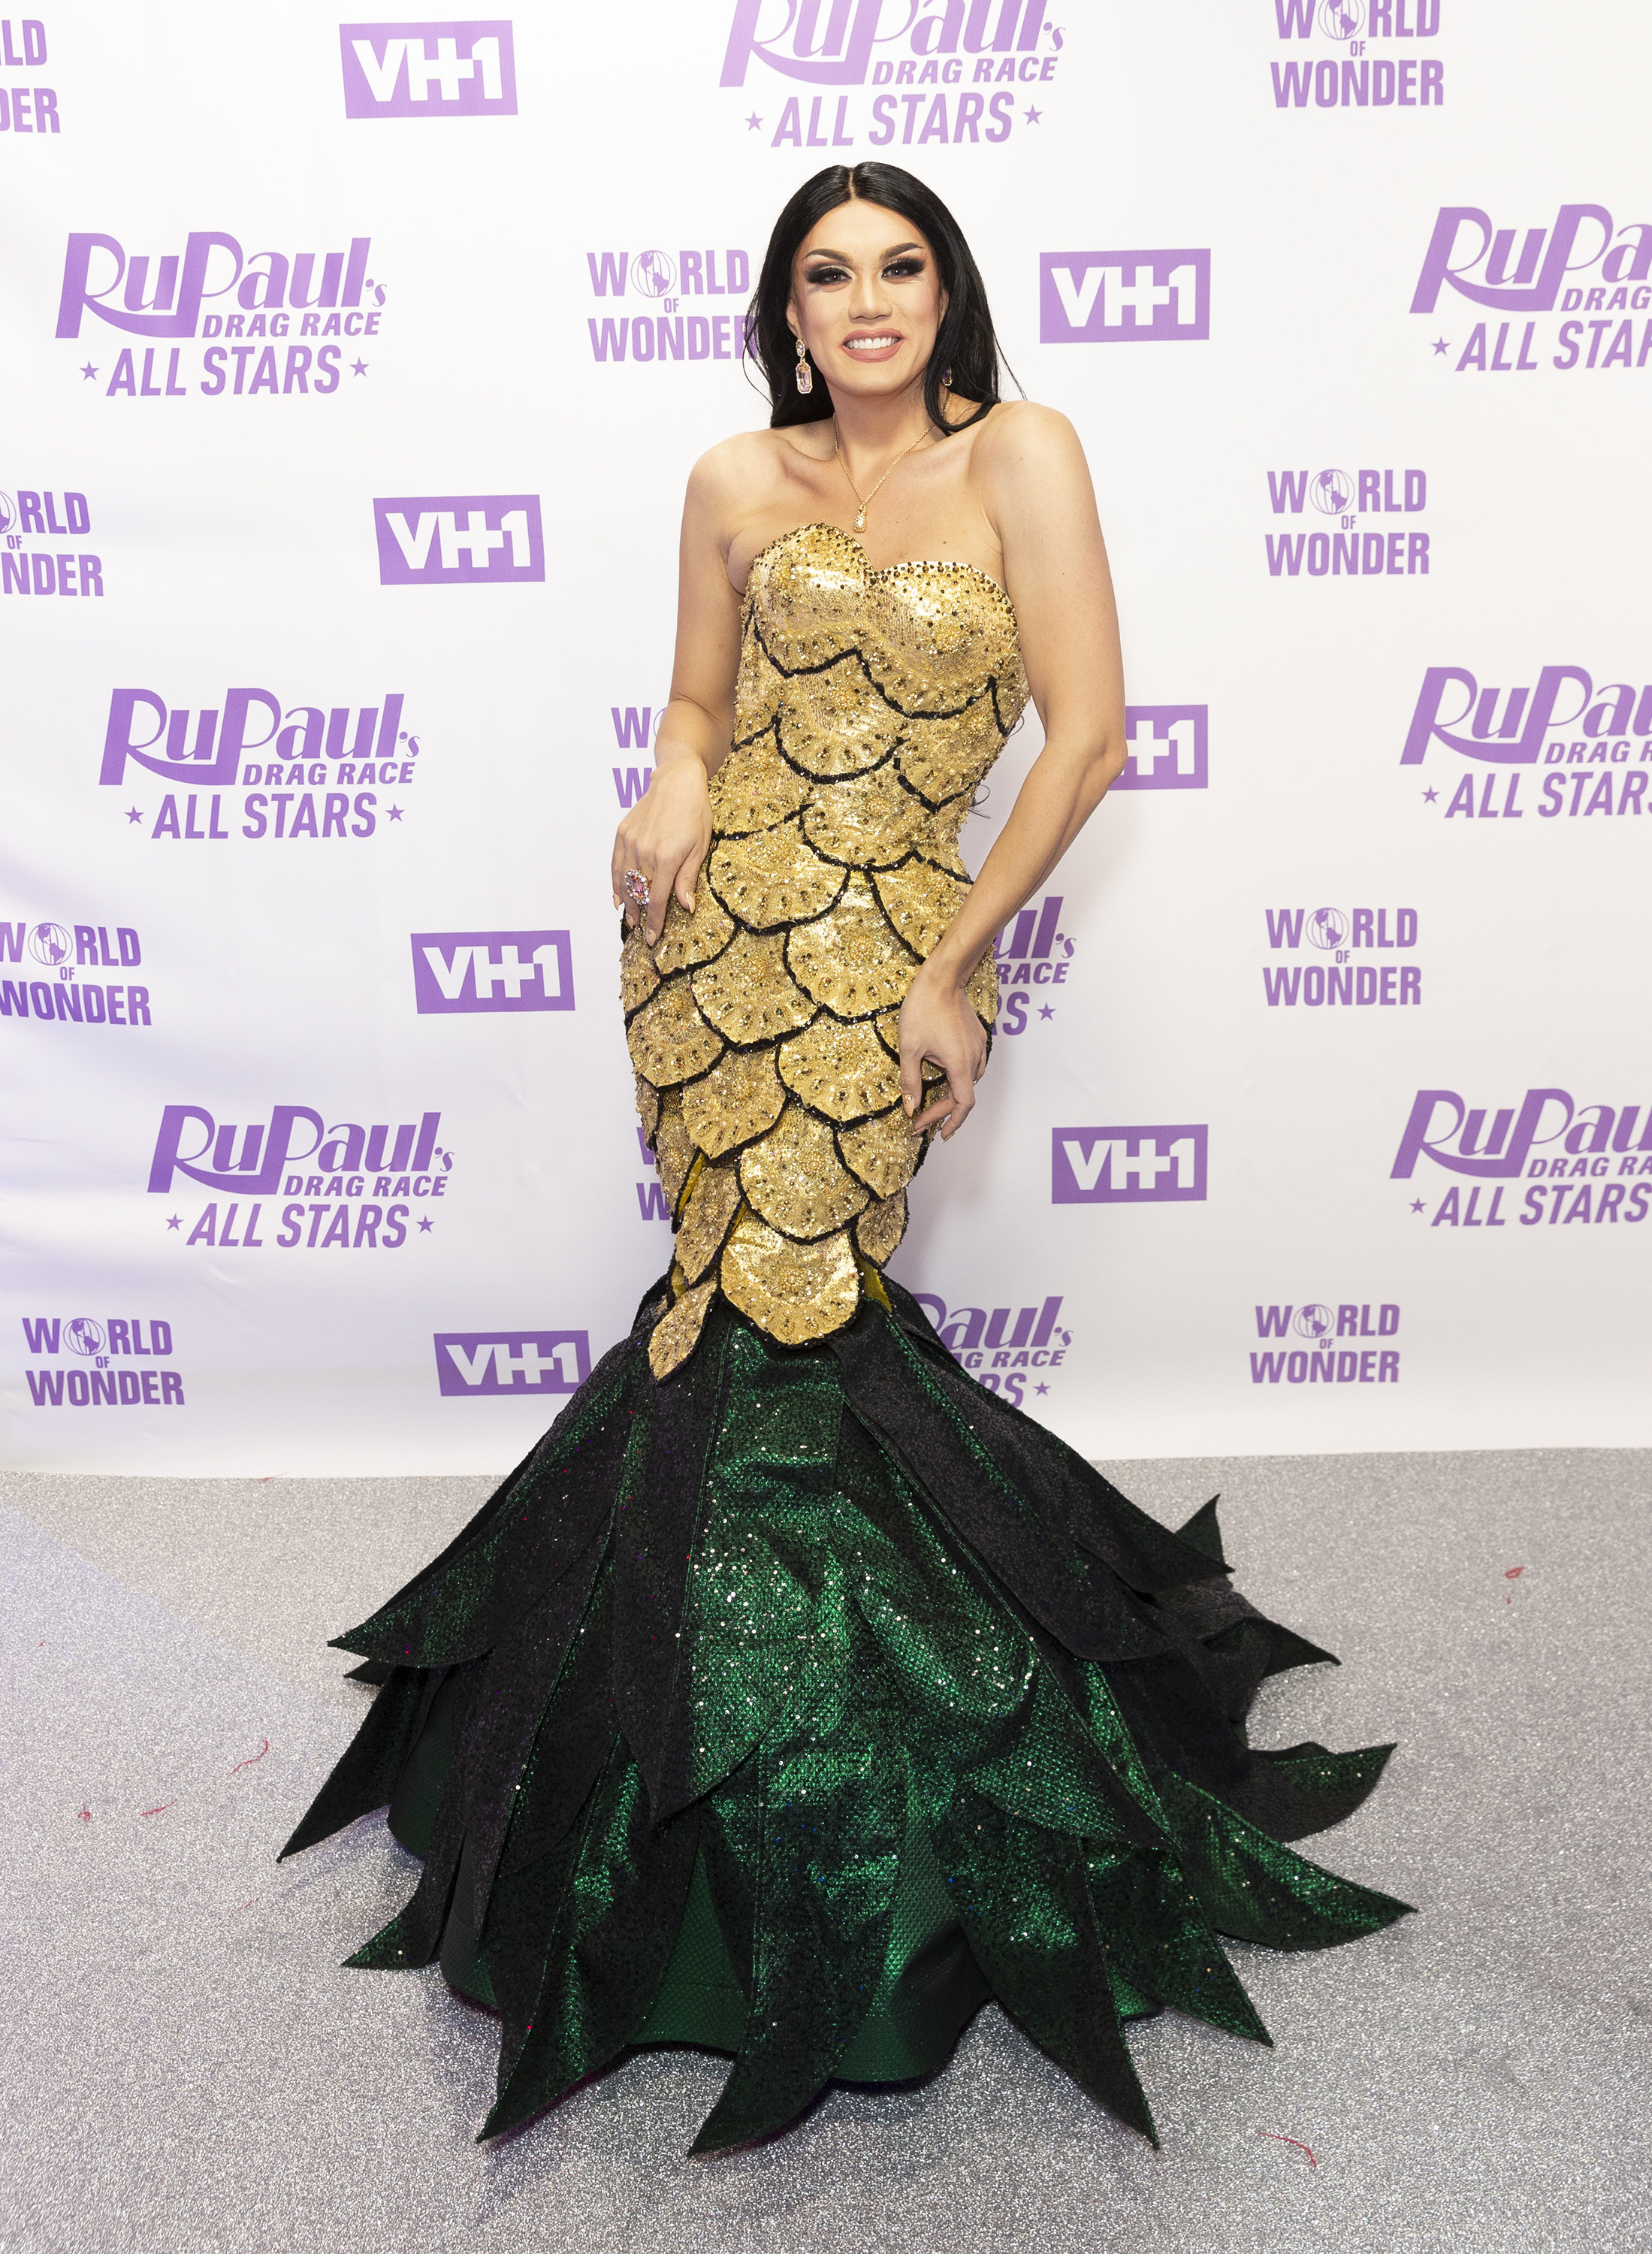 wearing a mermaid style dress at an event